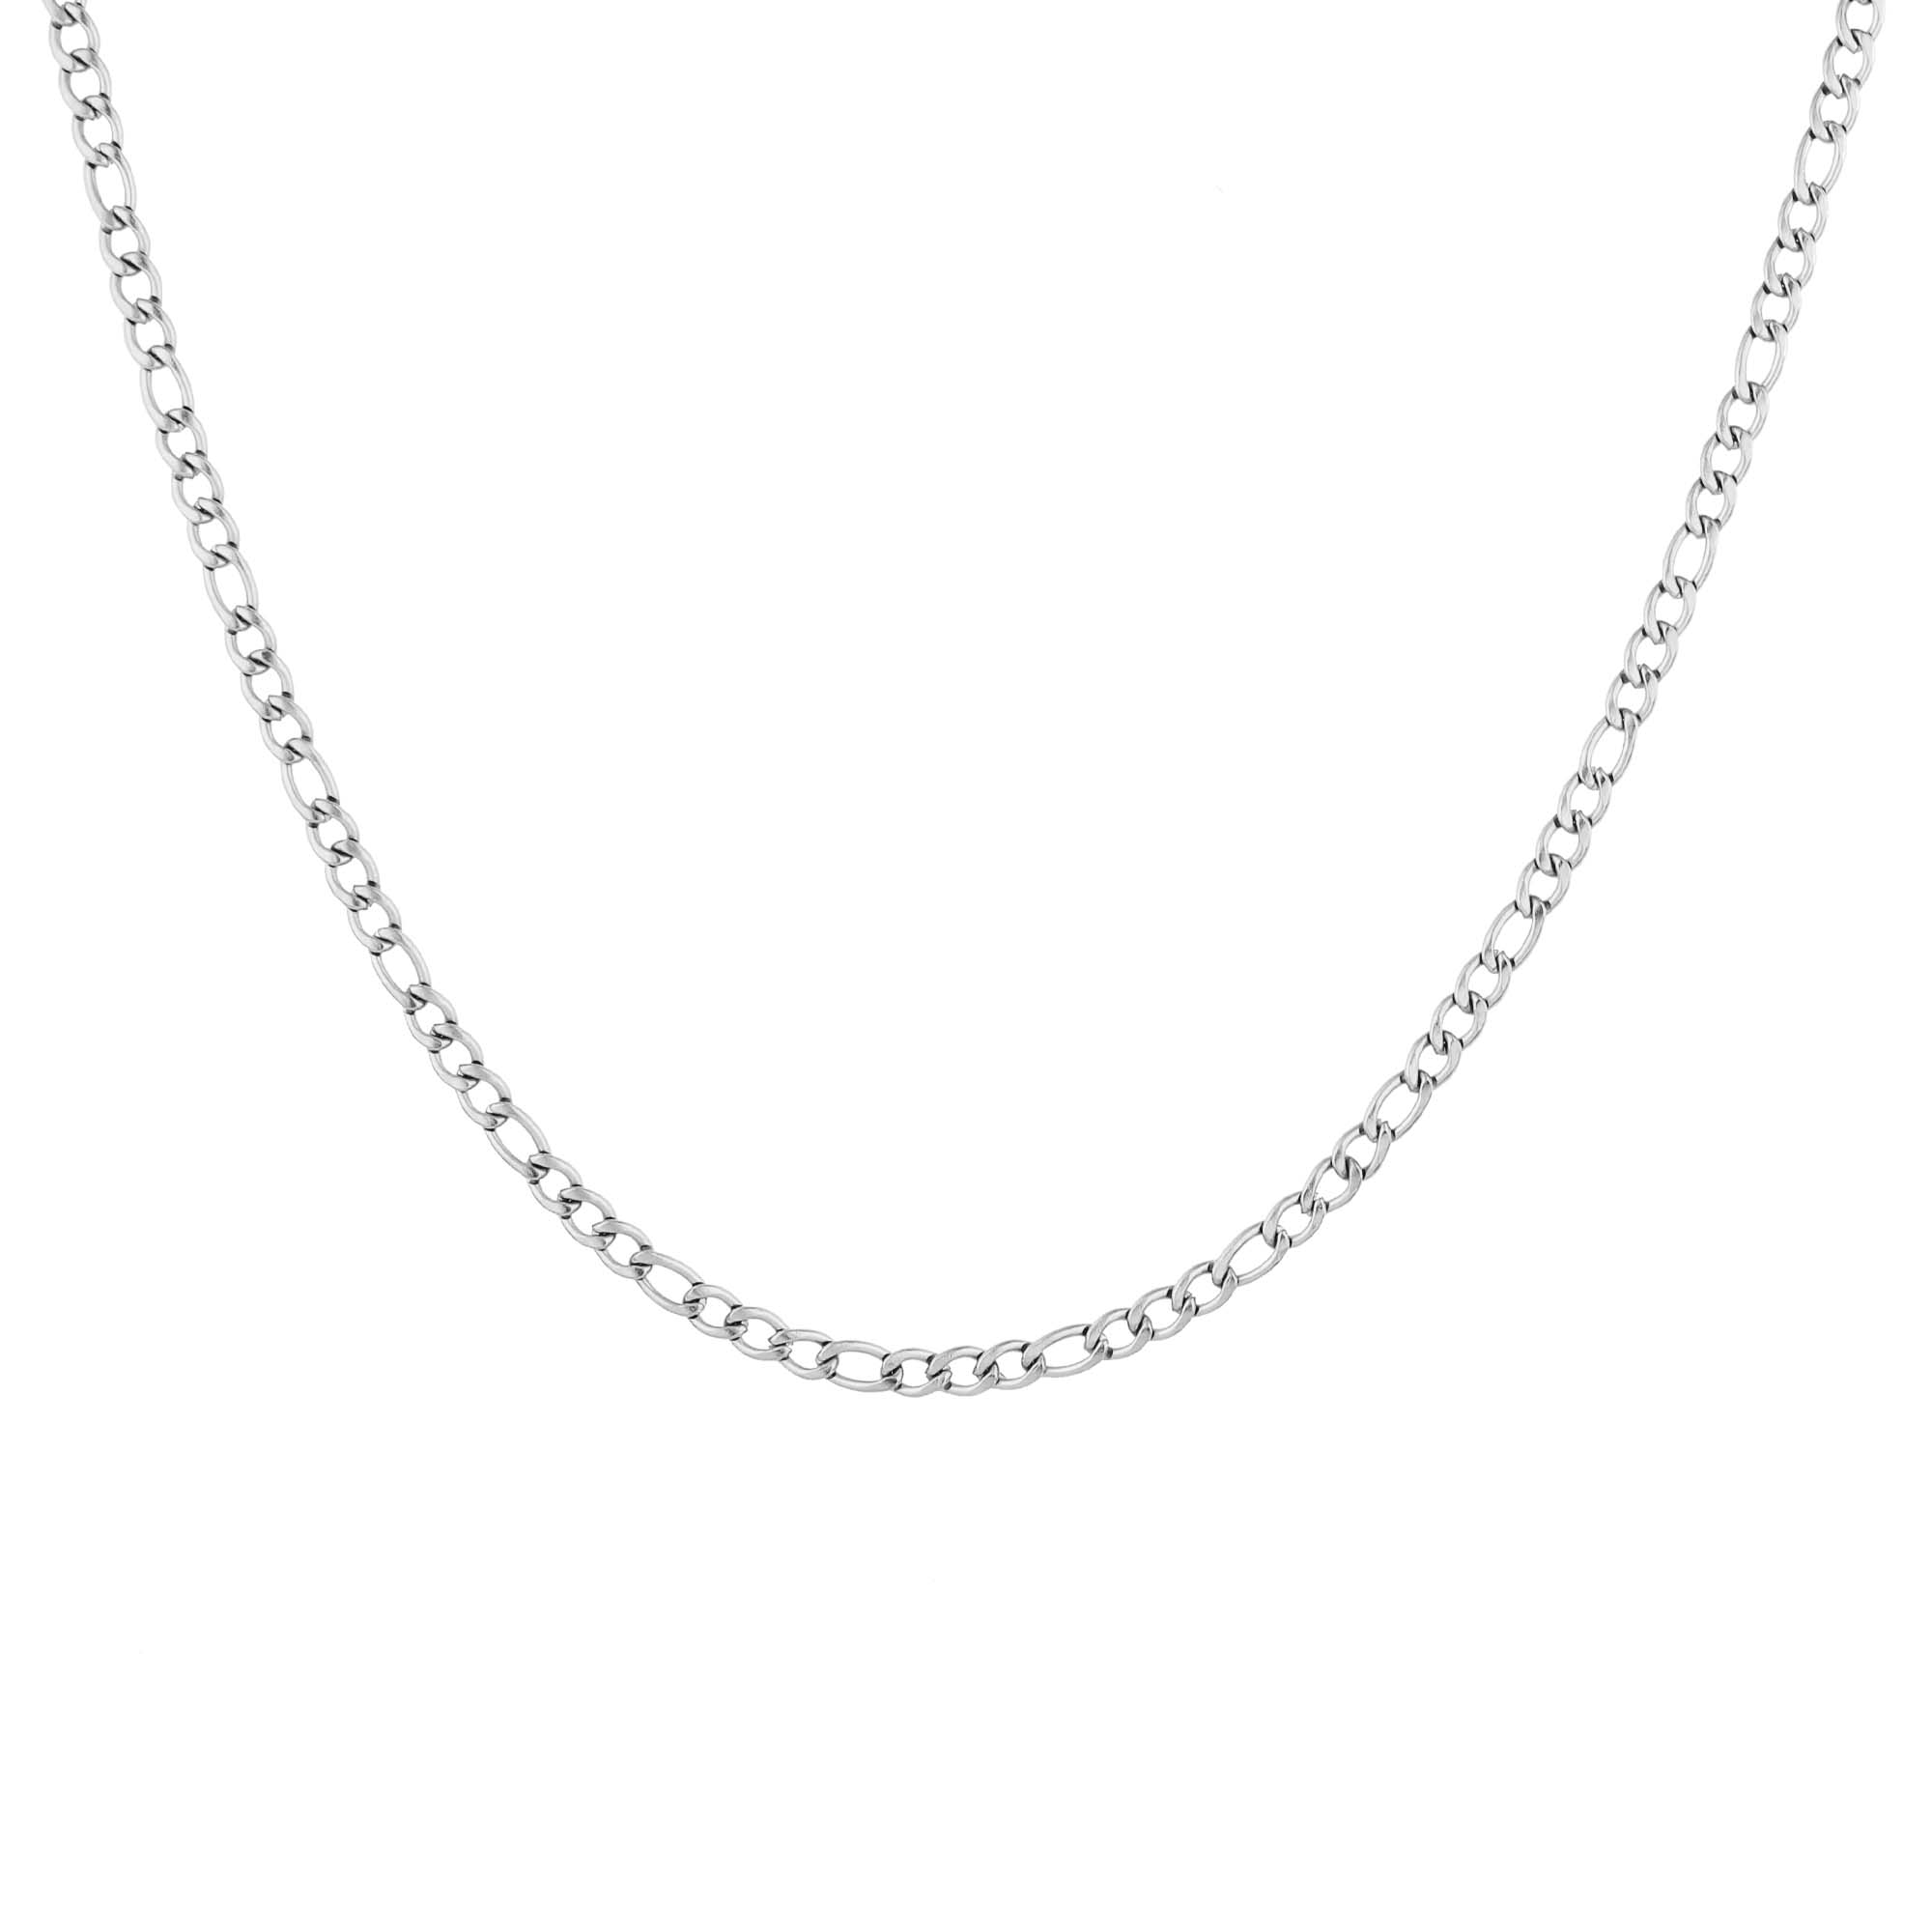 Valencia women's necklace by Five Jwlry, crafted from a 4mm figaro chain in silver-colored, water-resistant 316L stainless steel. Available in size 40cm with a 5cm extension. Hypoallergenic with a 2-year warranty.